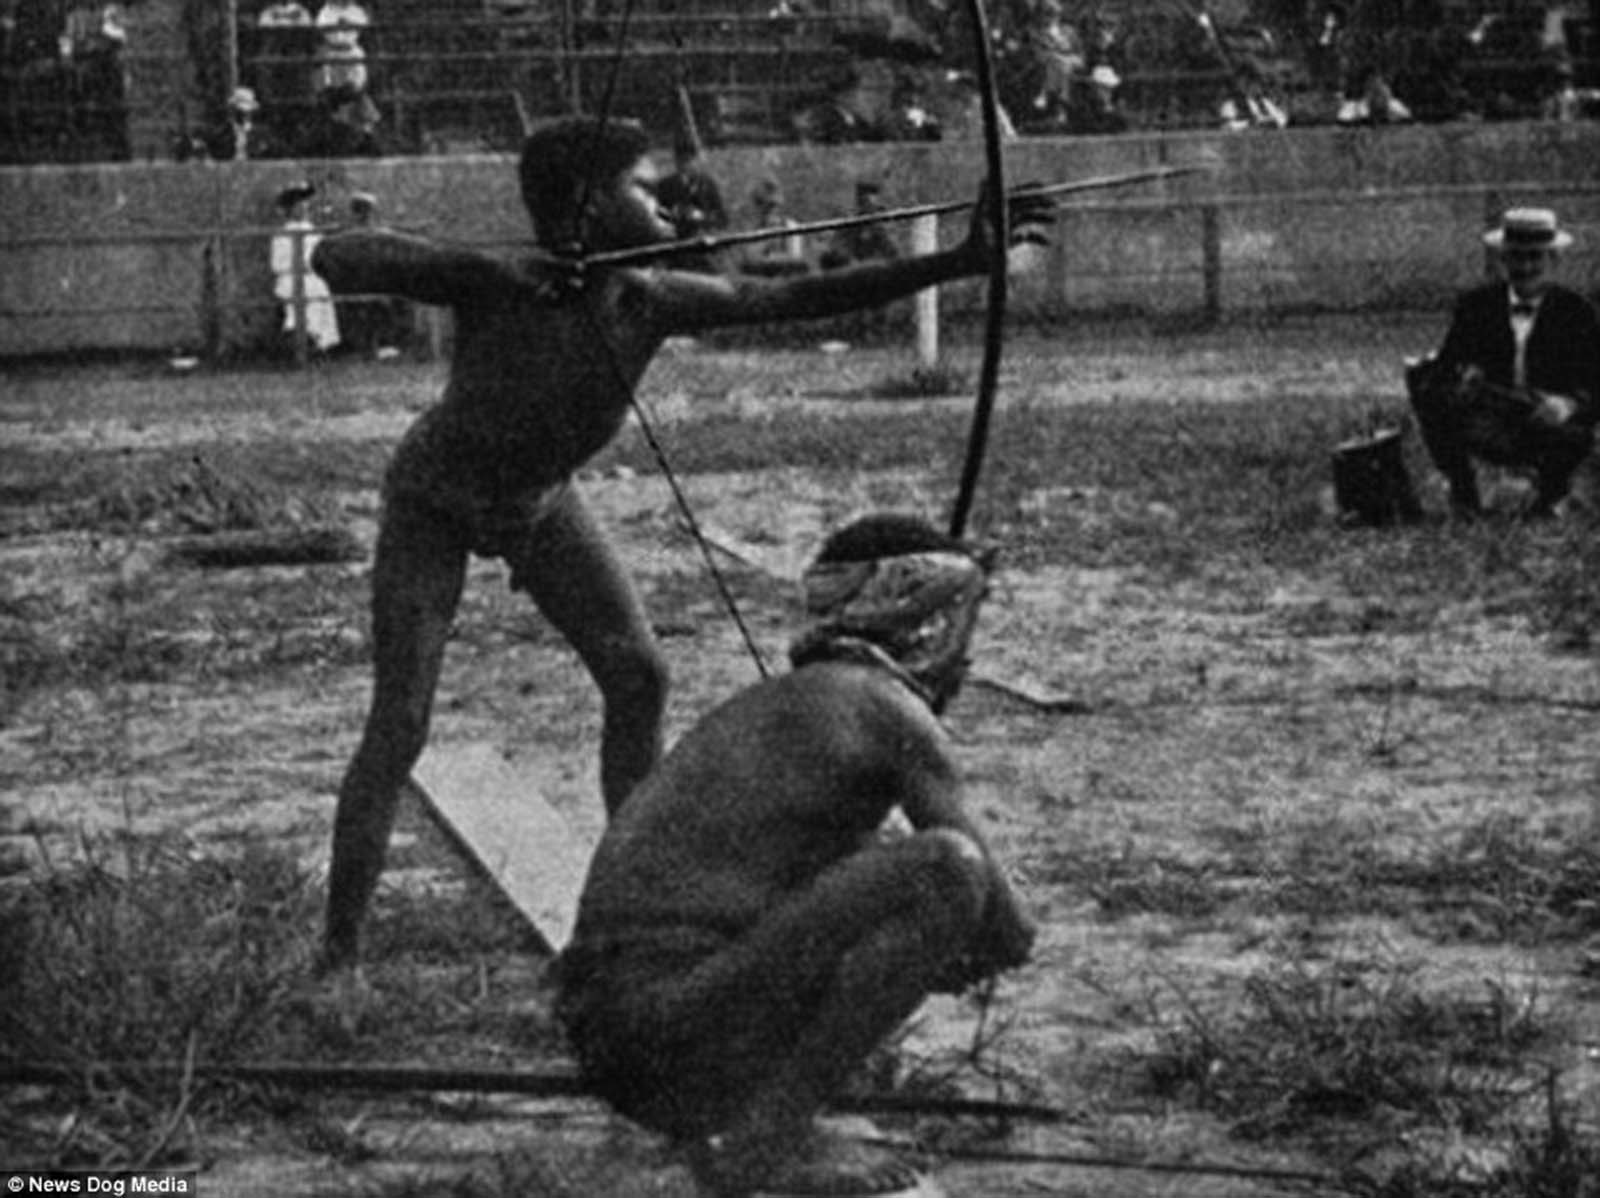 Indigenous people participating in archery in 1904 in St Louis, Missouri, at an event named the ‘Savage Olympics Exhibition’.